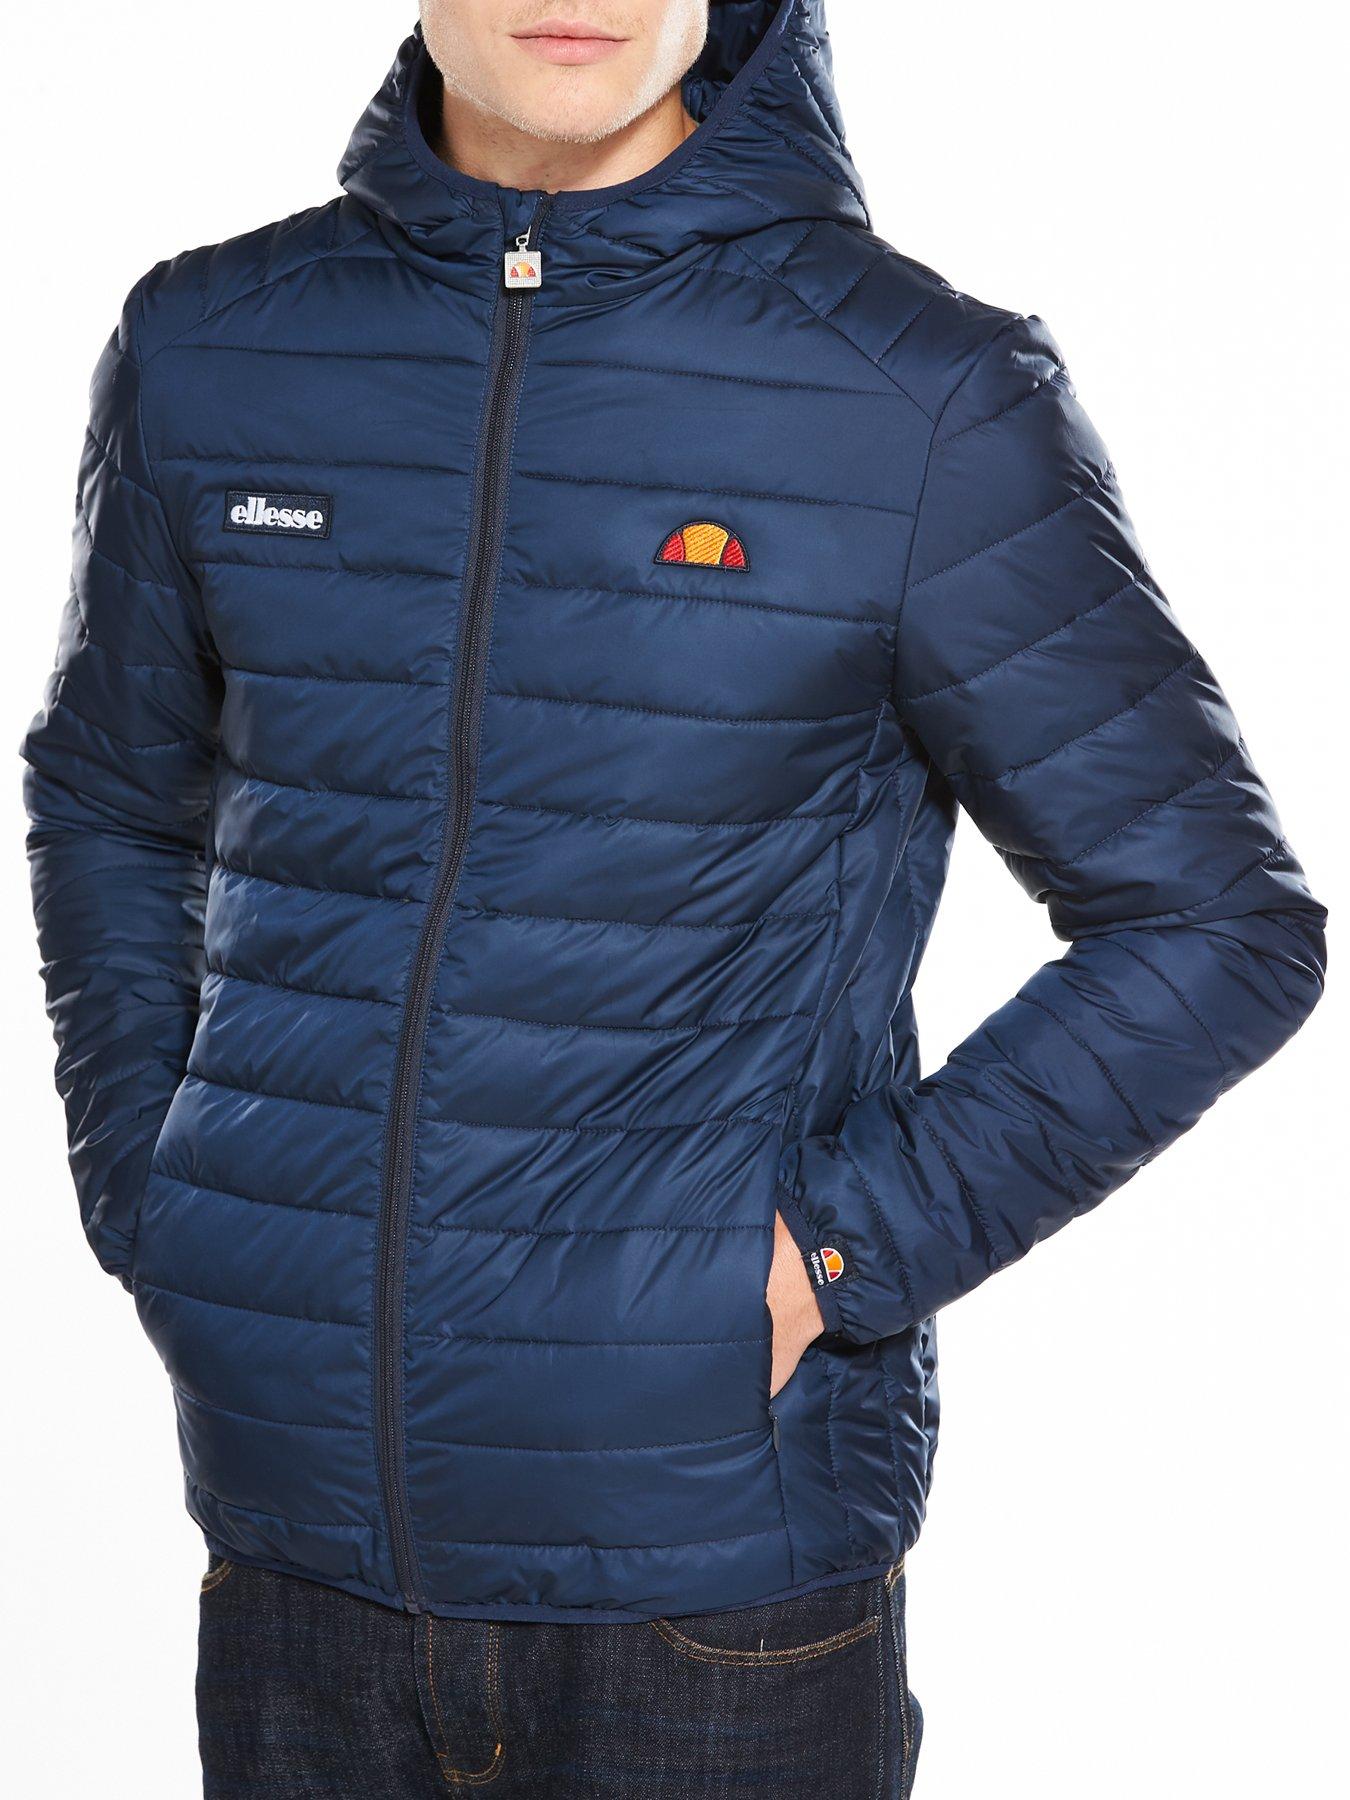 ellesse lombardy padded